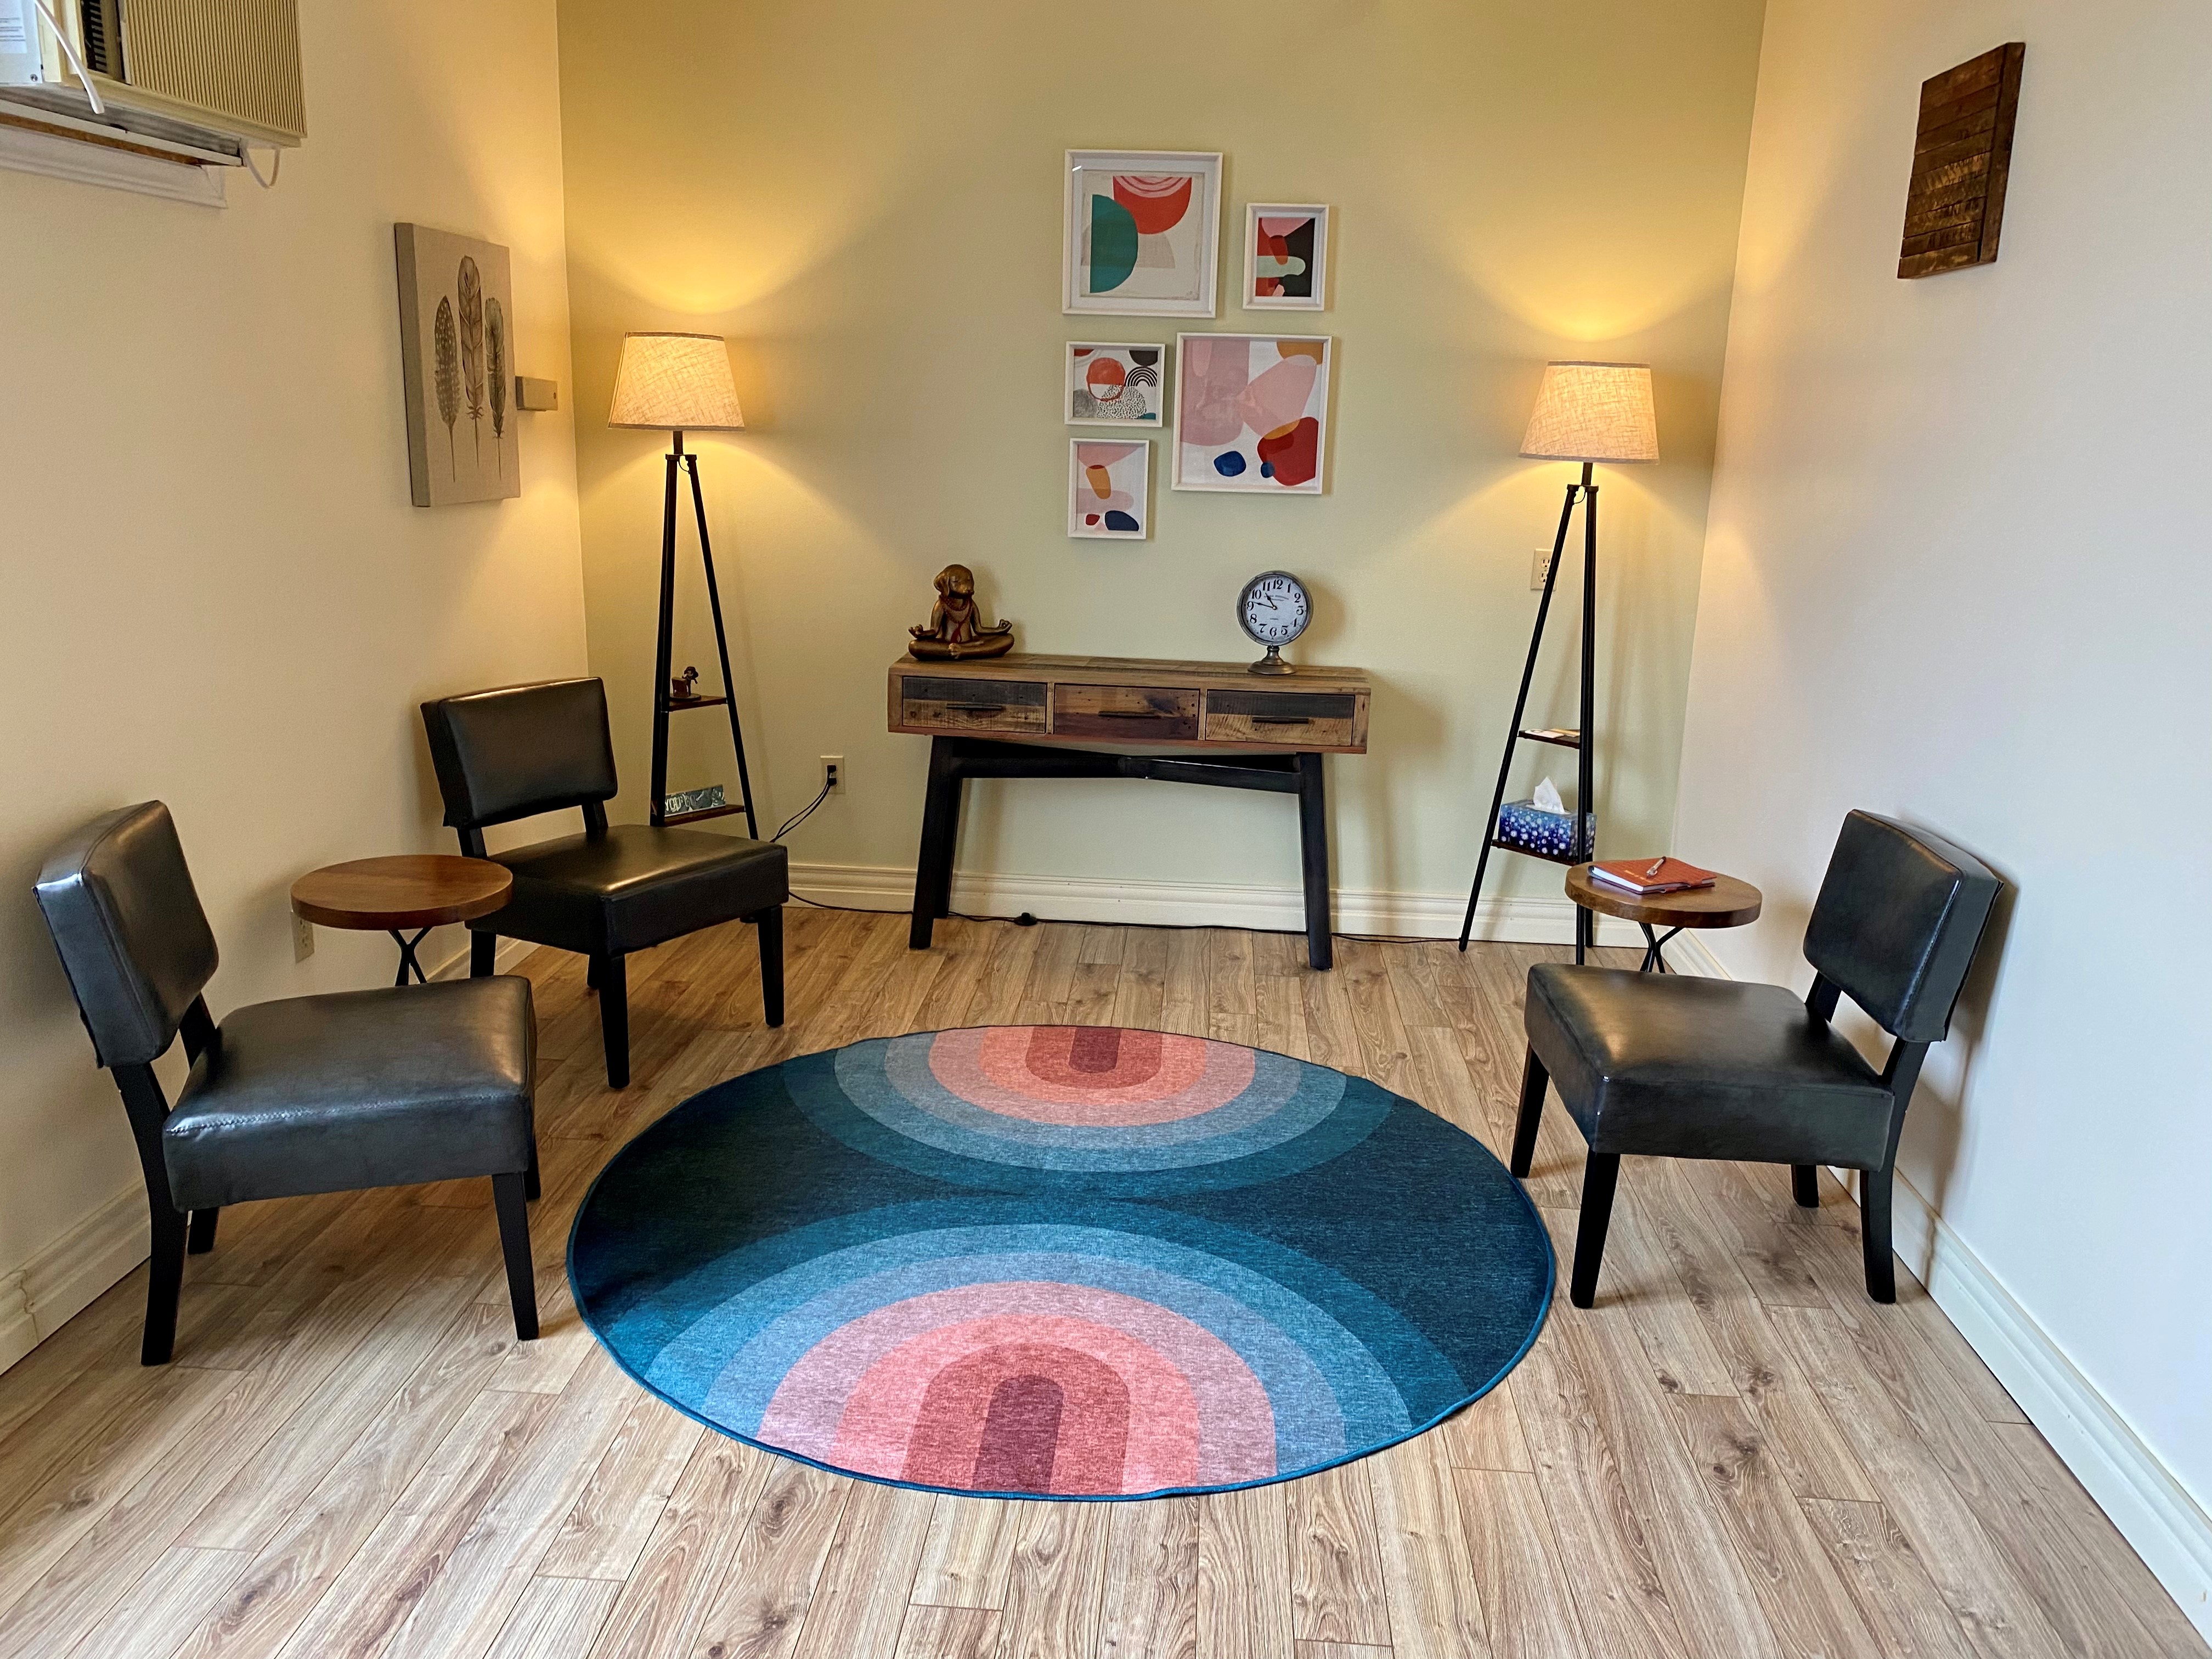 Counselling space